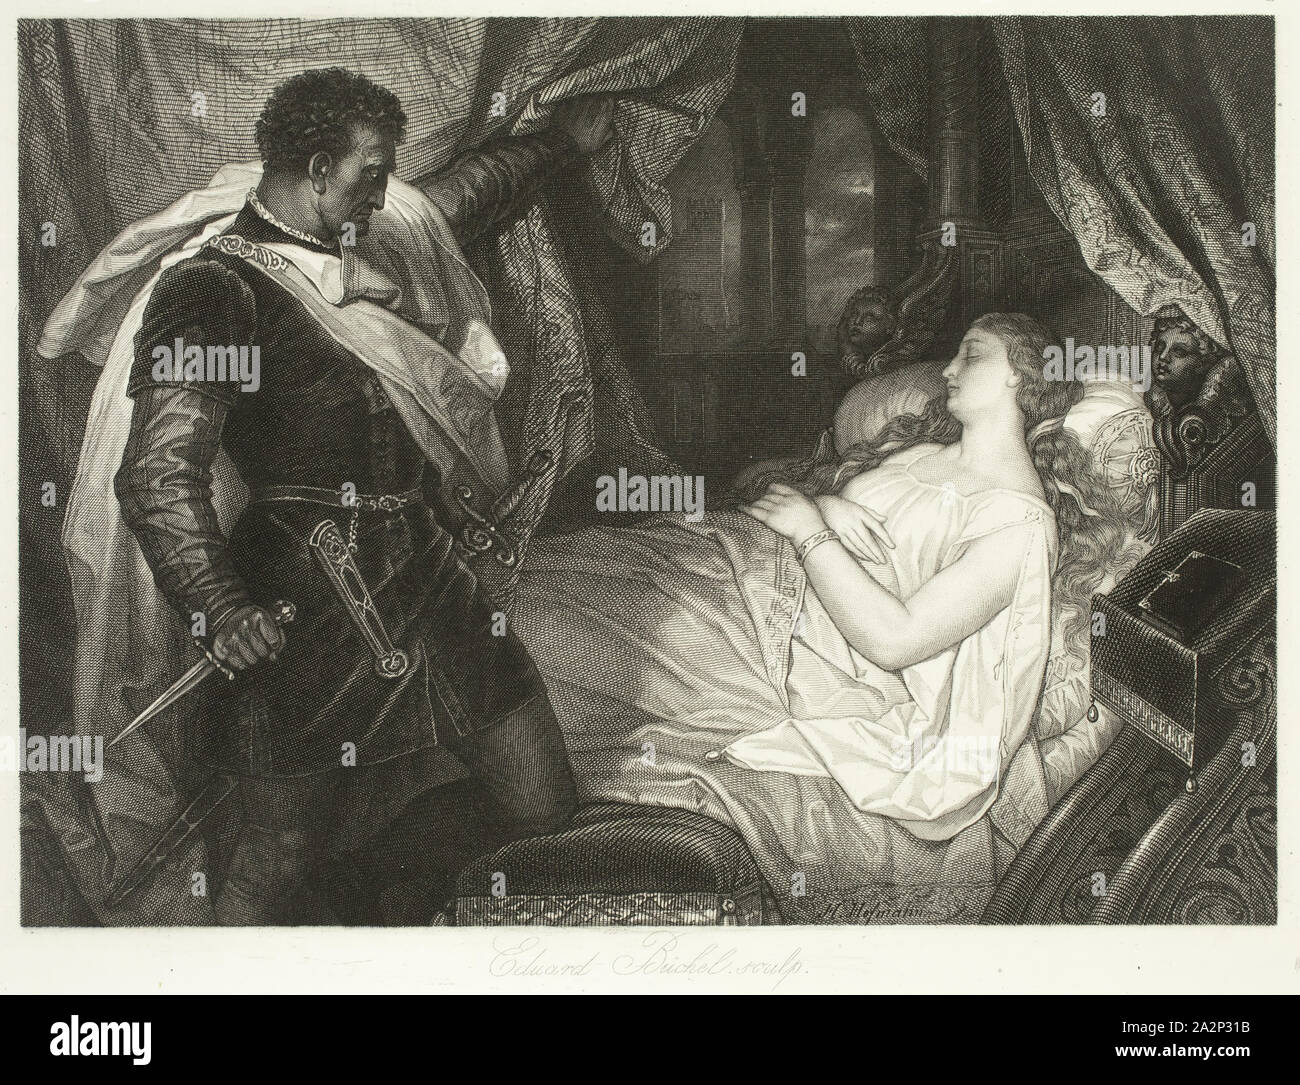 Edward Buchel, German, 1835-1903, after Heinrich Johann Michael Hofmann, German, 1824-1911, Othello and Desdemona, 19th century, etching and engraving printed in black ink on wove paper, Image: 6 3/8 × 8 7/8 inches (16.2 × 22.5 cm Stock Photo